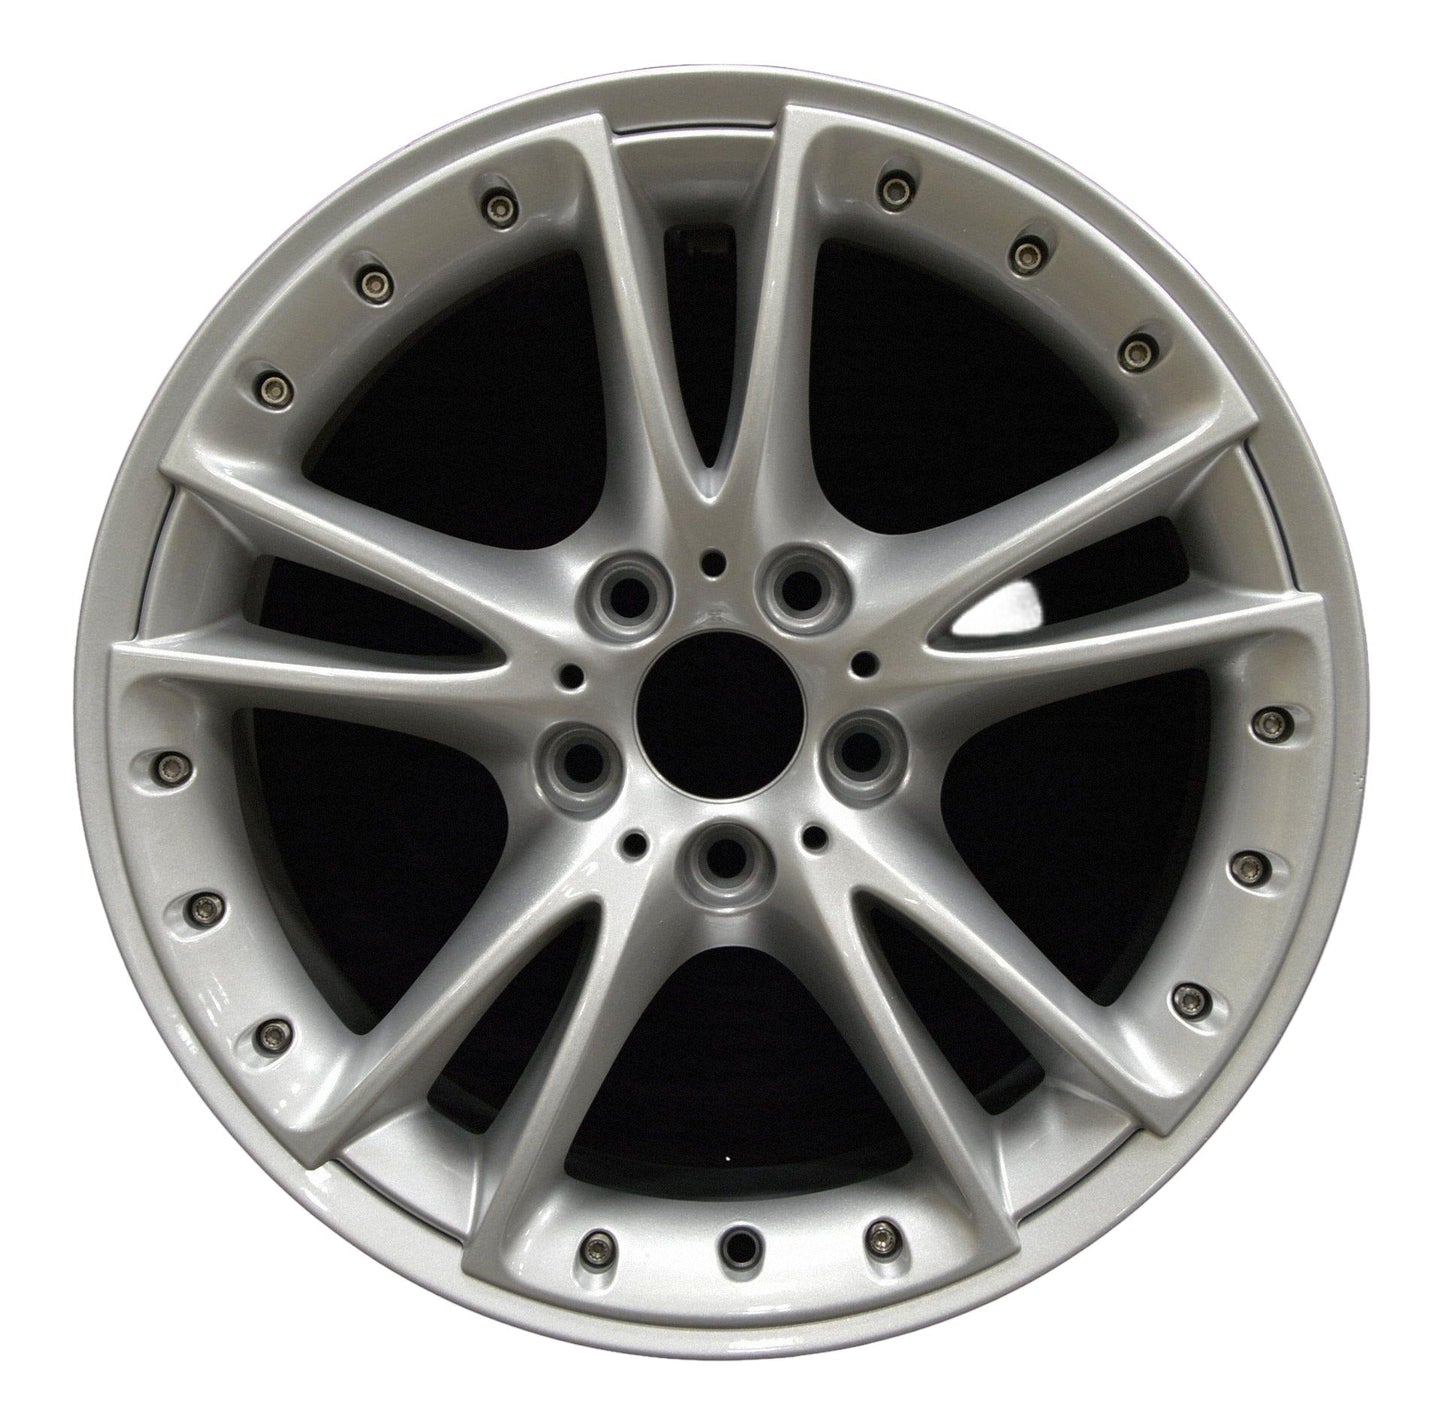 BMW Z4  2009, 2010, 2011, 2012, 2013, 2014, 2015, 2016 Factory OEM Car Wheel Size 18x8 Alloy WAO.71356FT.PS10.FF